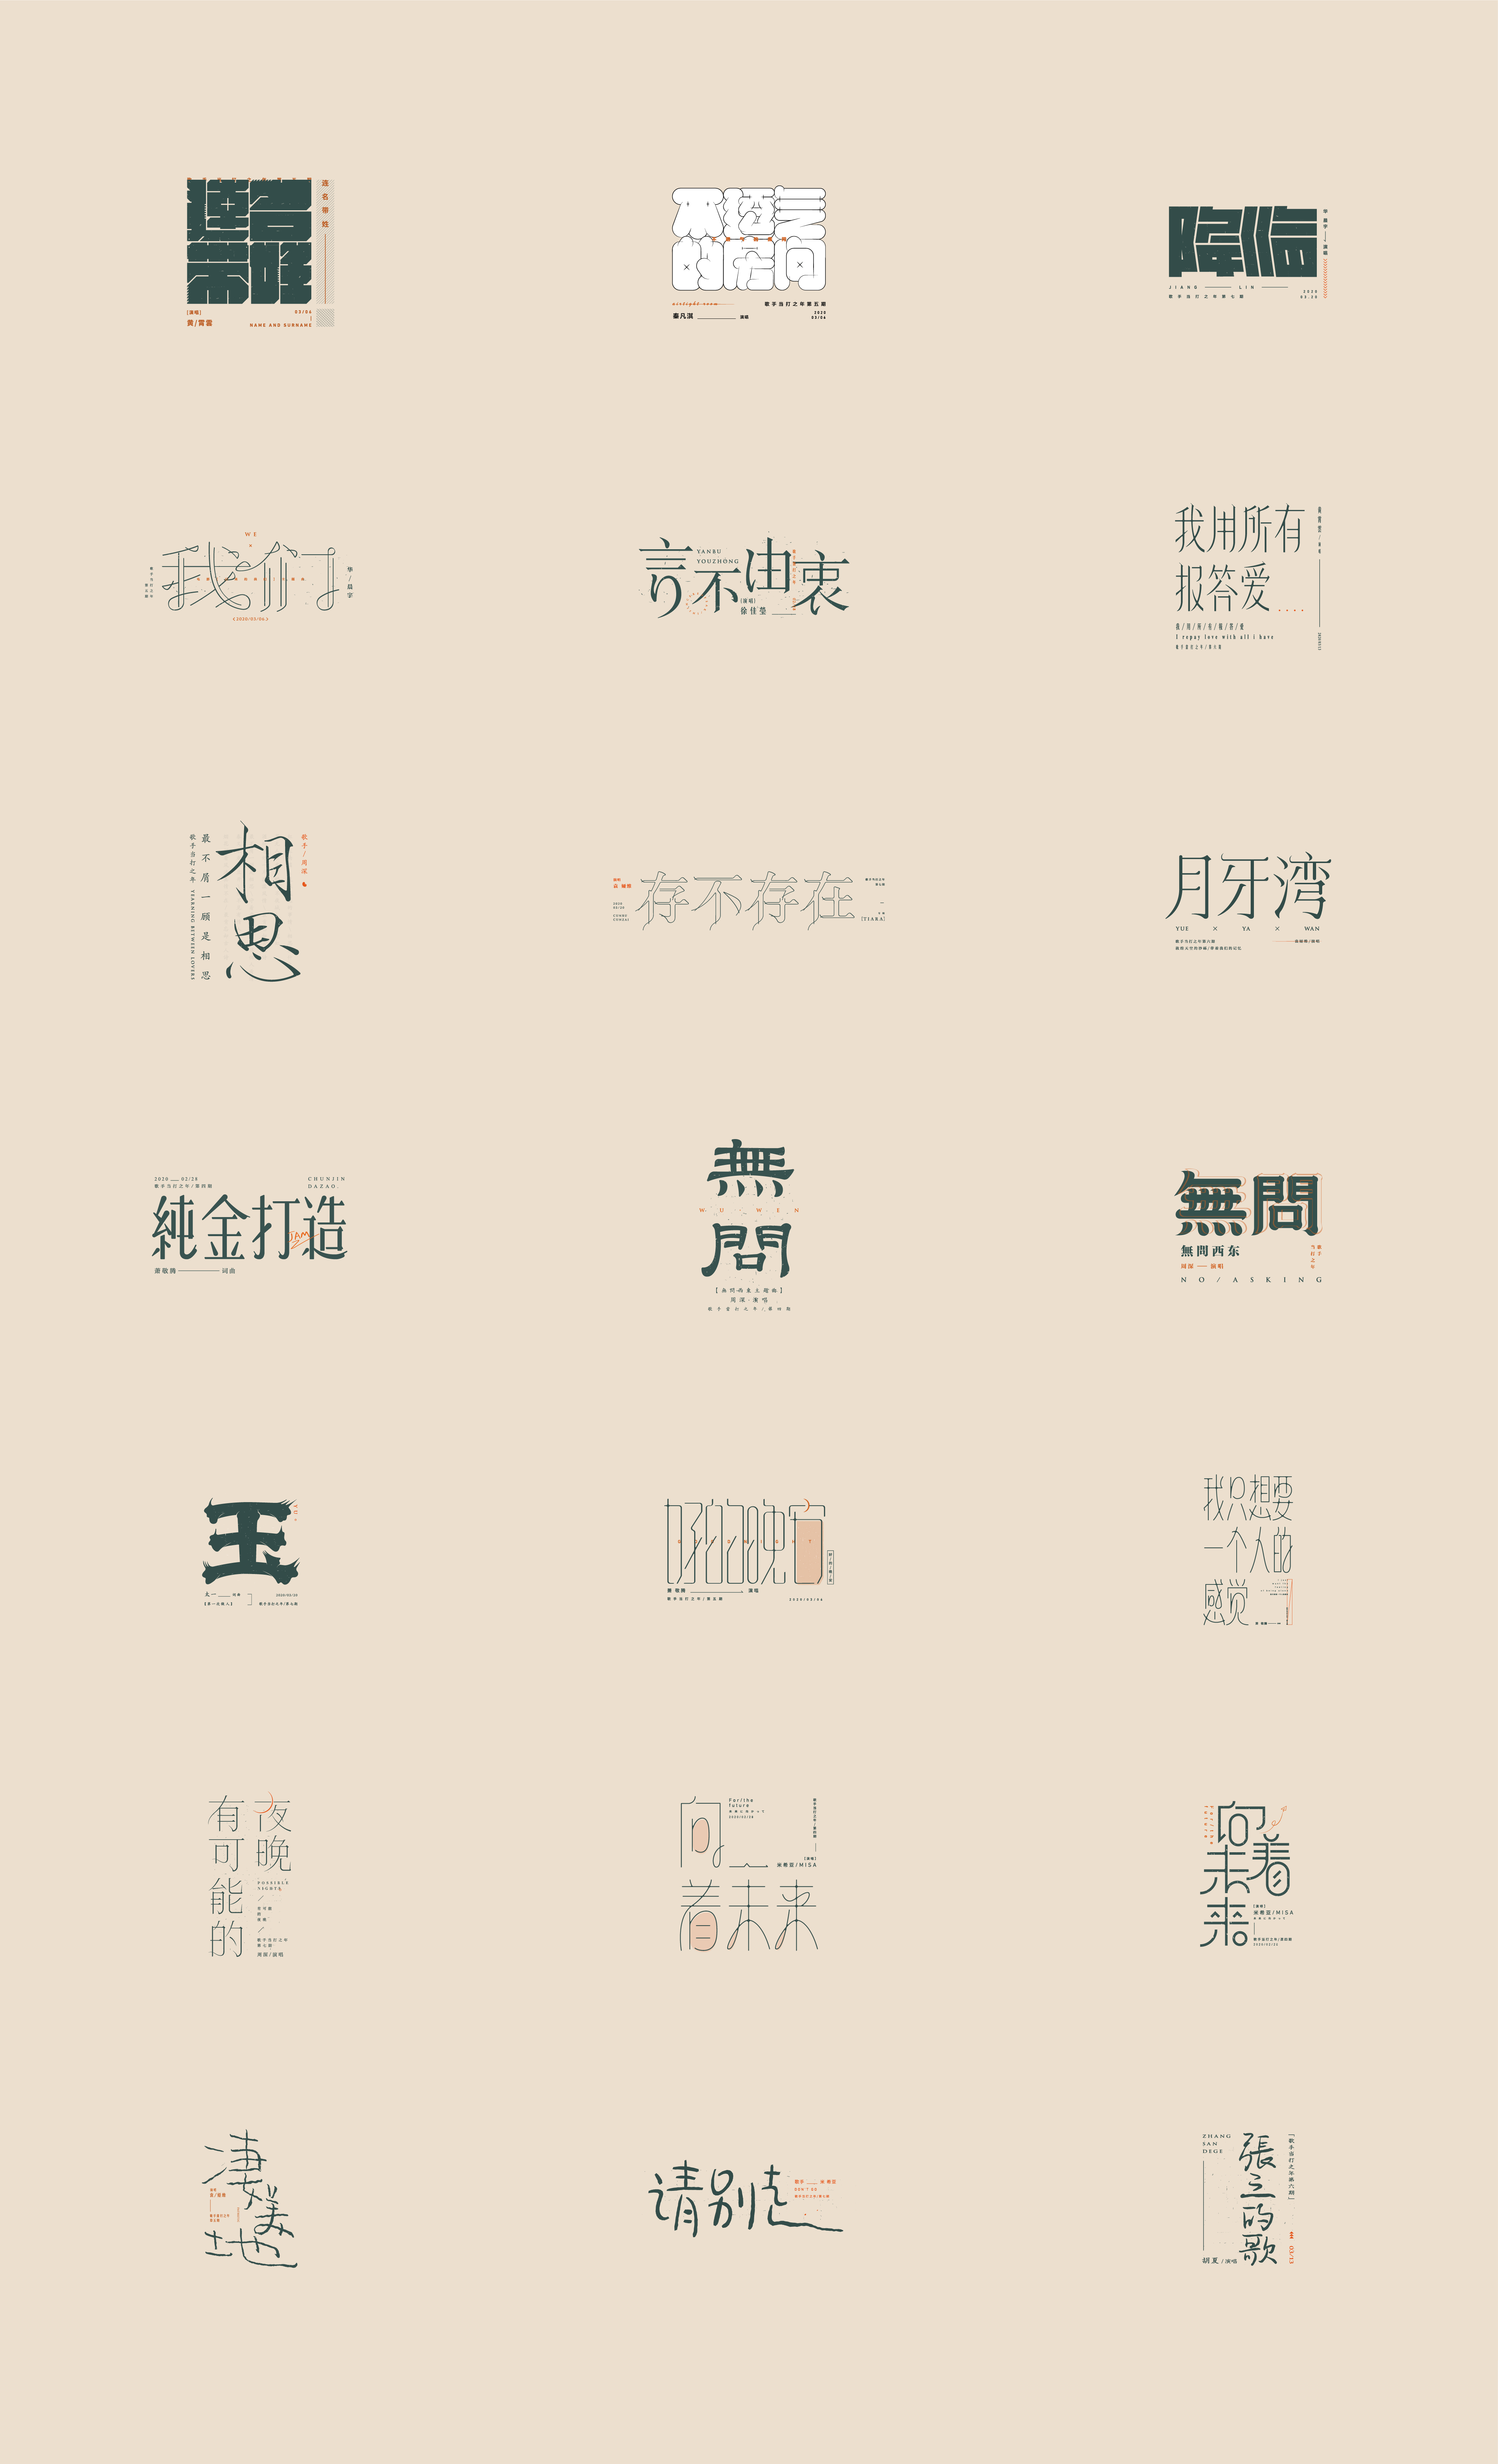 Collection of font design of Chinese classic songs with different styles